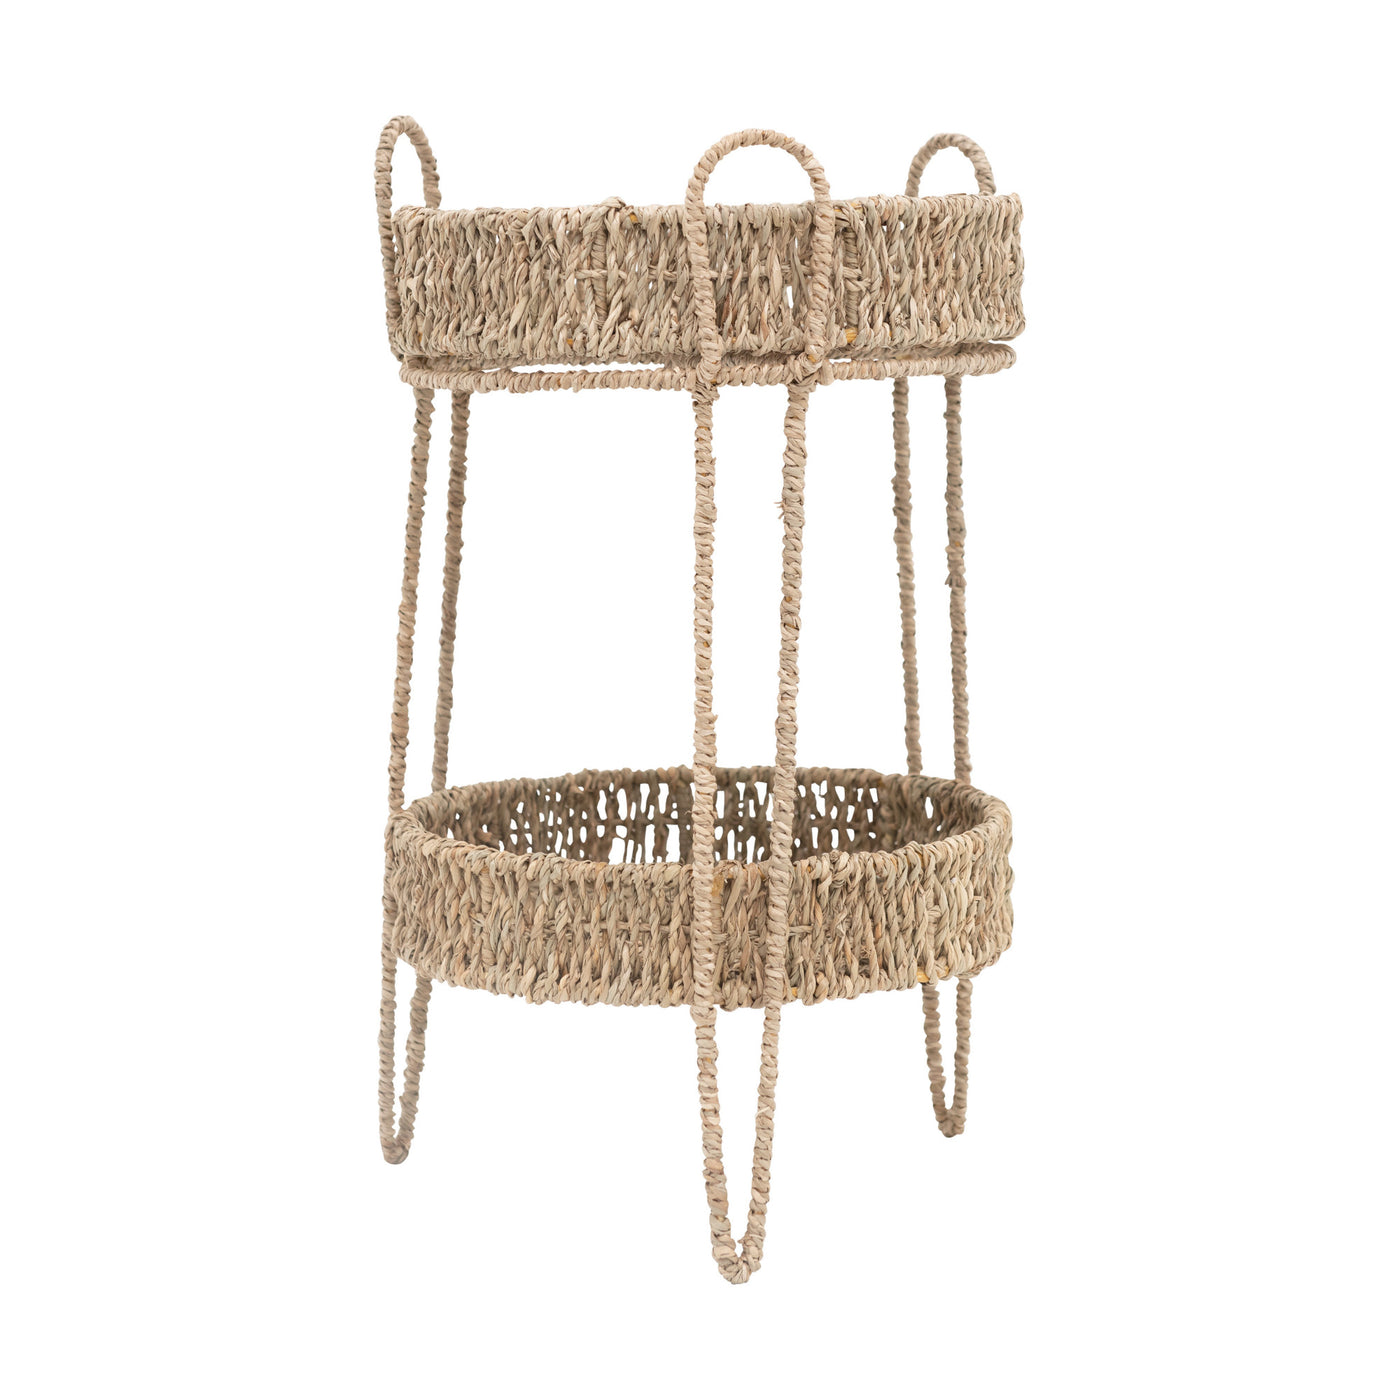 Basket Tray/Stand